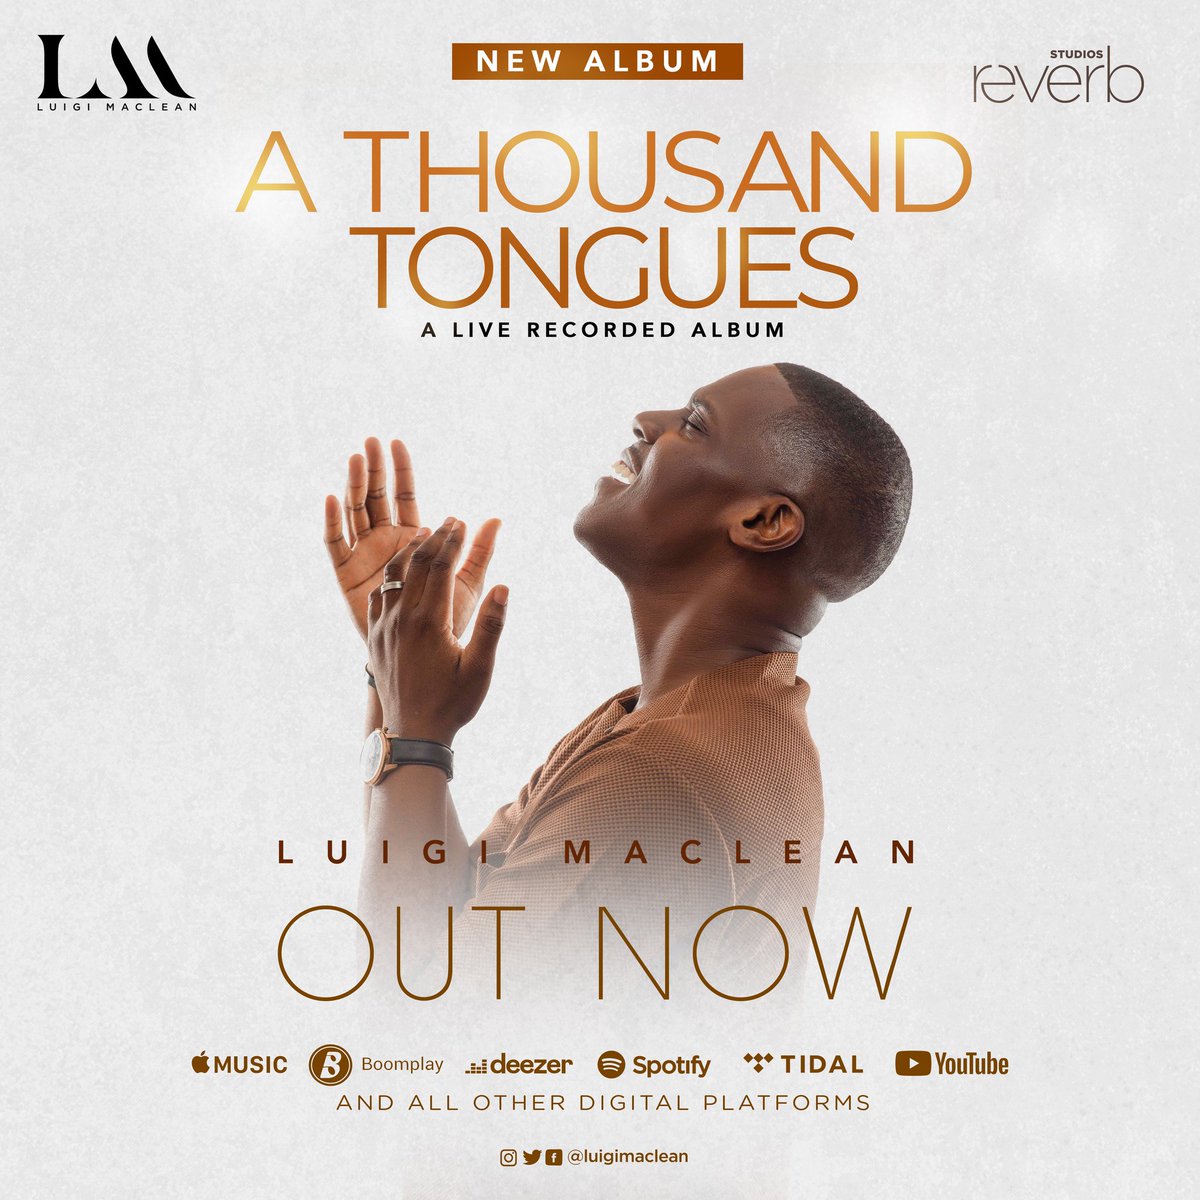 Hello Family! A thousand tongues is out on all digital streaming platforms. Thank you all for your support. I pray these songs bless you as you listen. Click the link fanlink.tv/a-thousand-ton…  to stream!

#aThousandTongues
#LuigiMaclean
#ReverbStudiosGH
#AlbumRelease